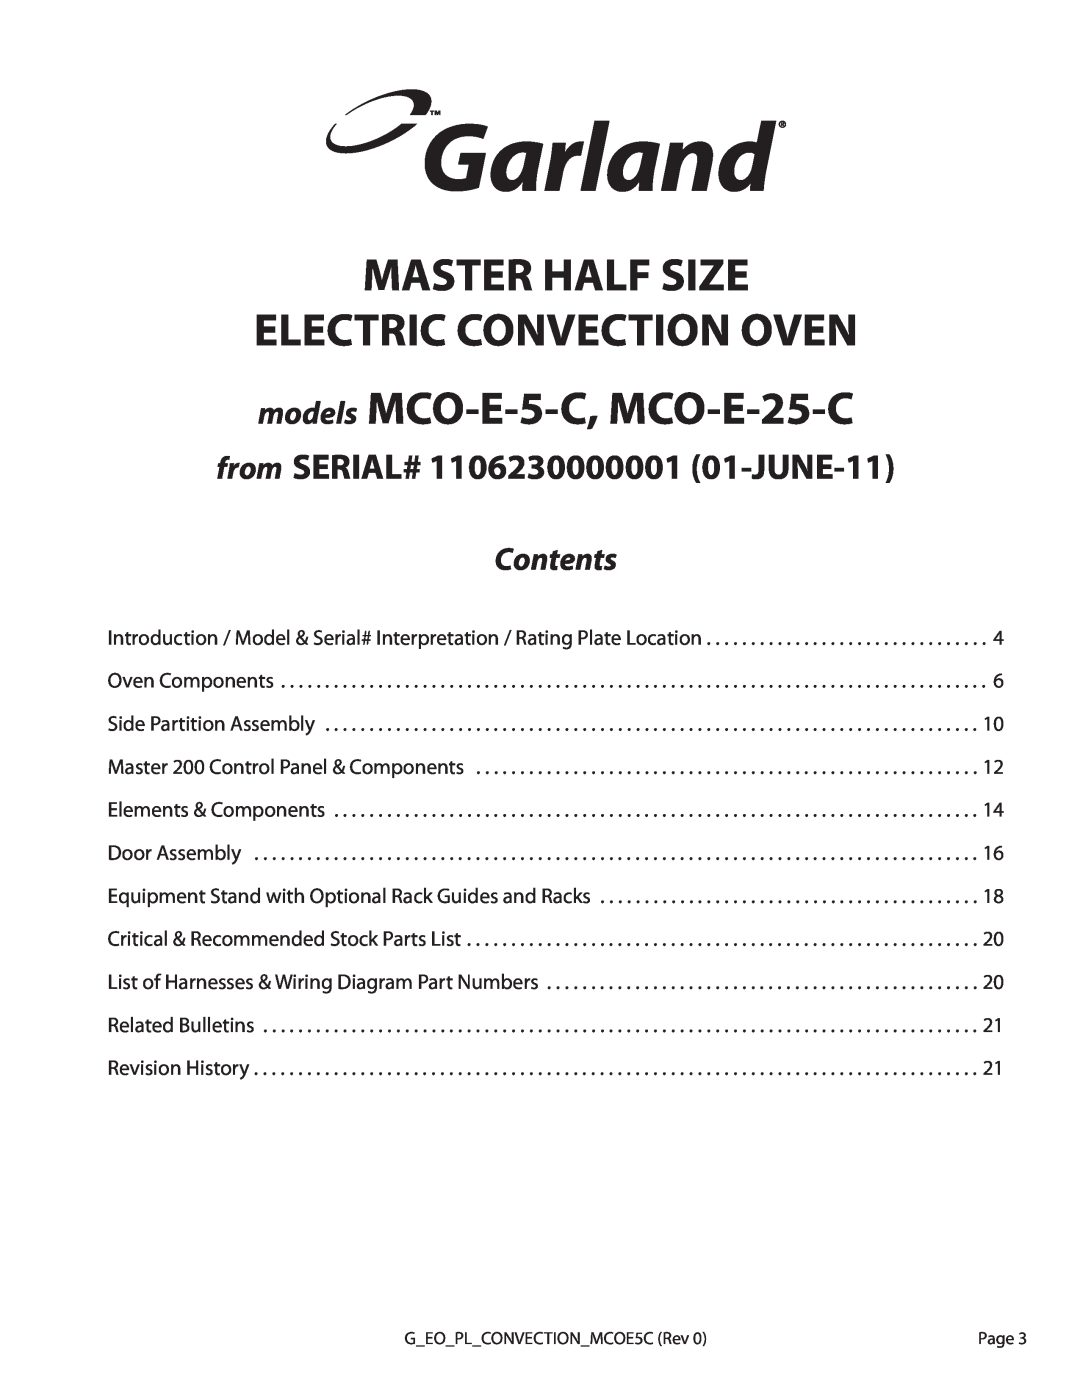 Garland Master Half Size Electric Convection Oven, models MCO-E-5-C, MCO-E-25-C, from SERIAL# 1106230000001 01-JUNE-11 